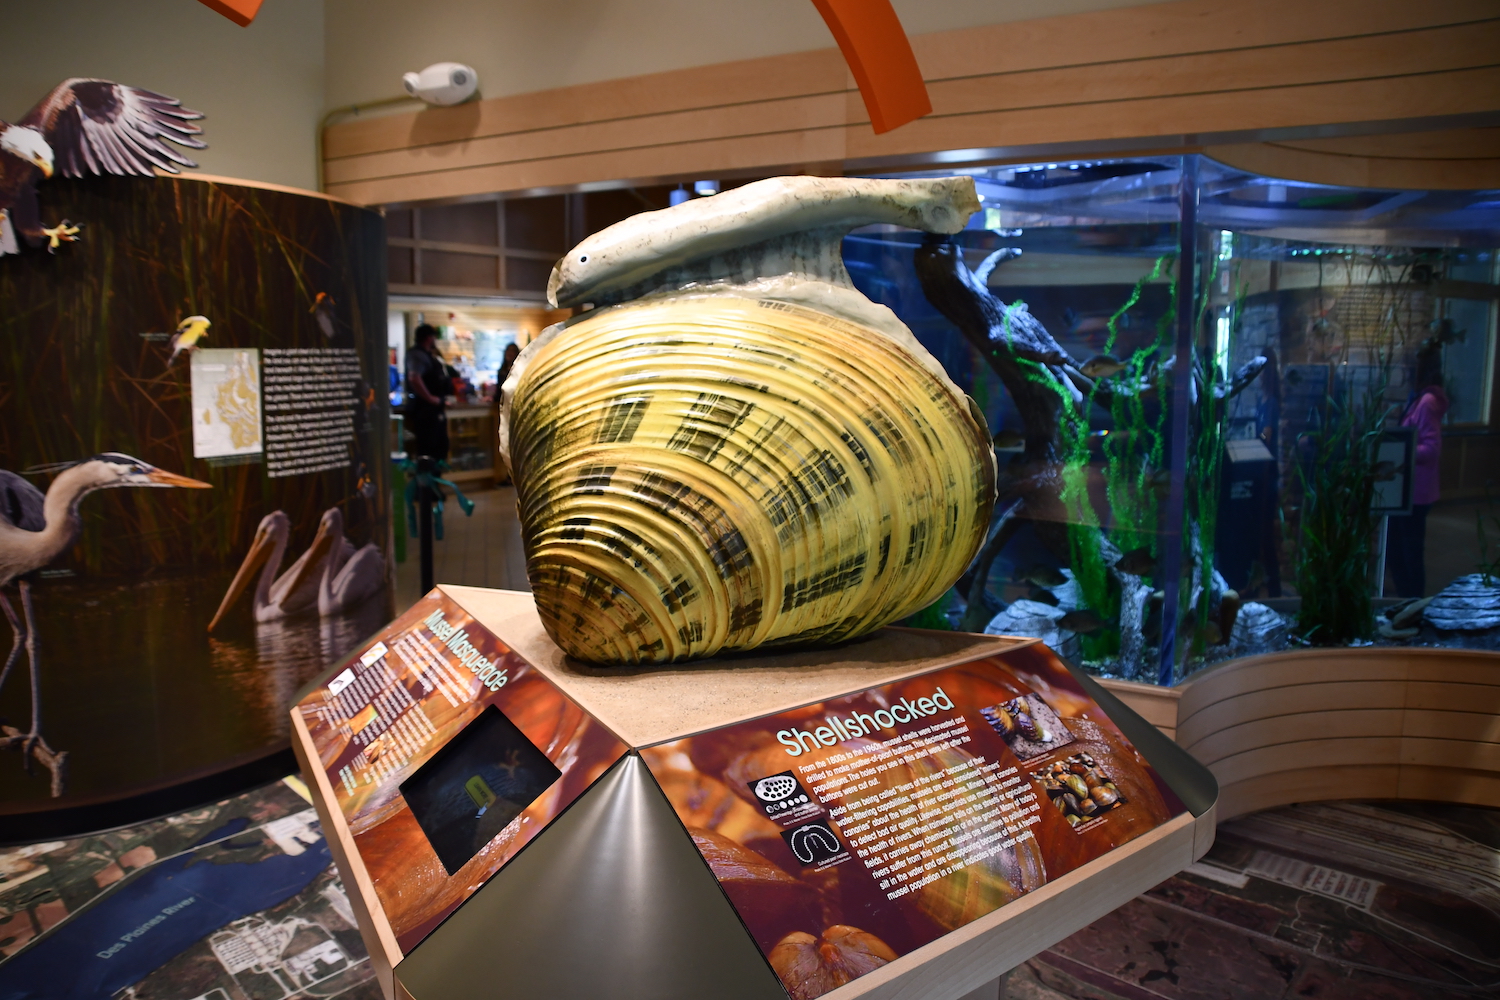 A nature center exhibit featuring a large mussel.